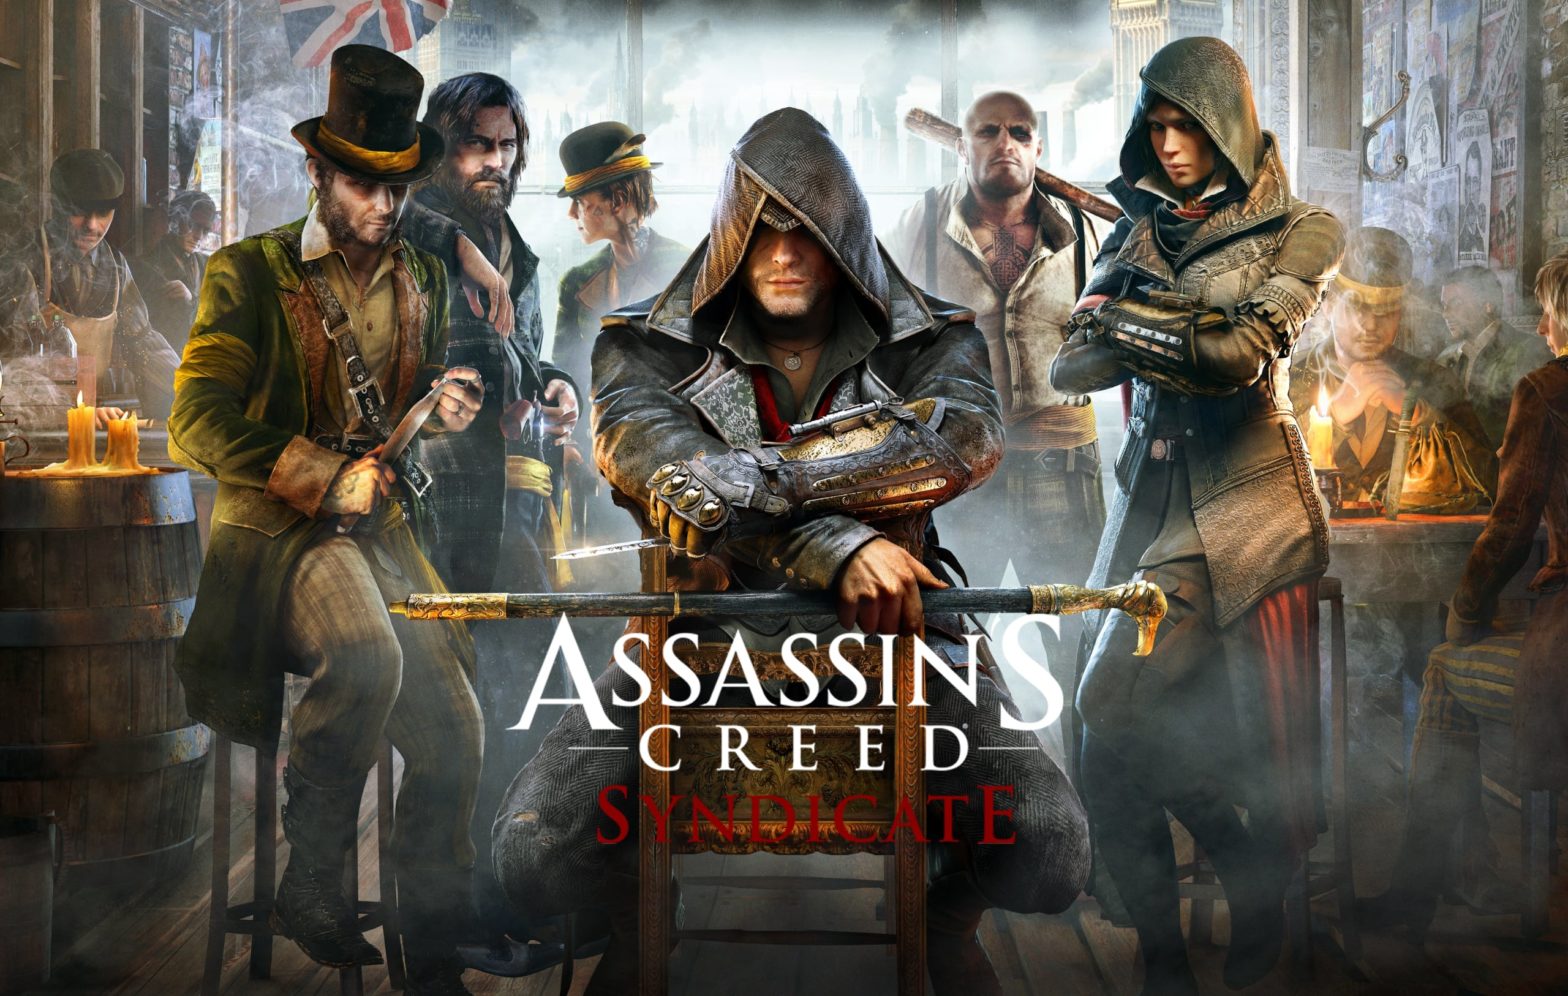 Assassin's Creed Syndicate Teaser